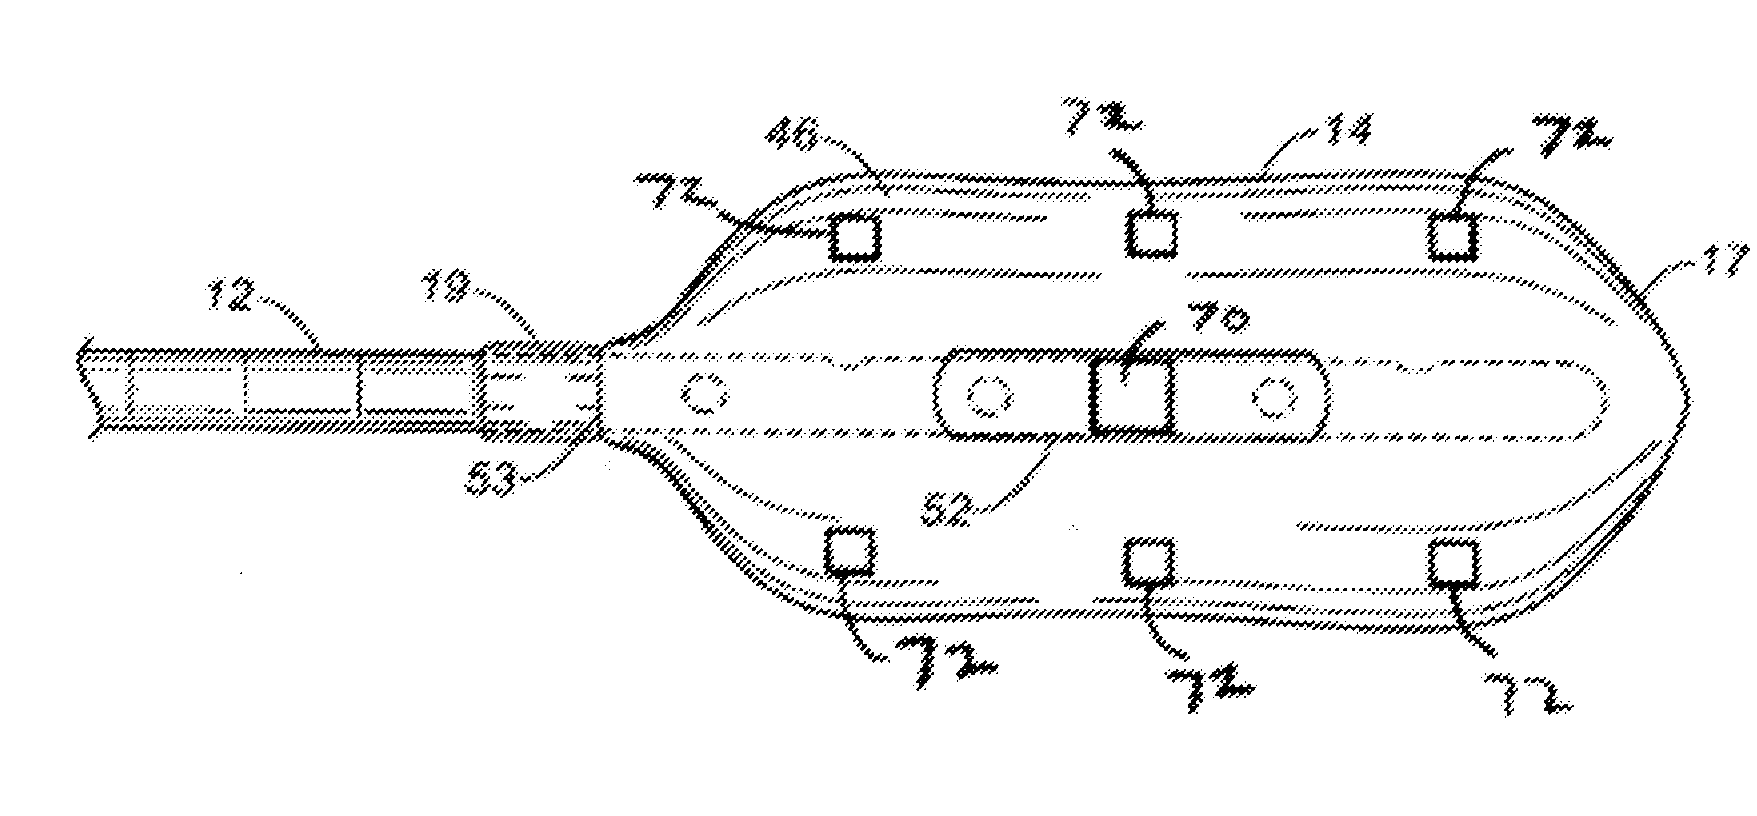 Rectal balloon with sensor cable